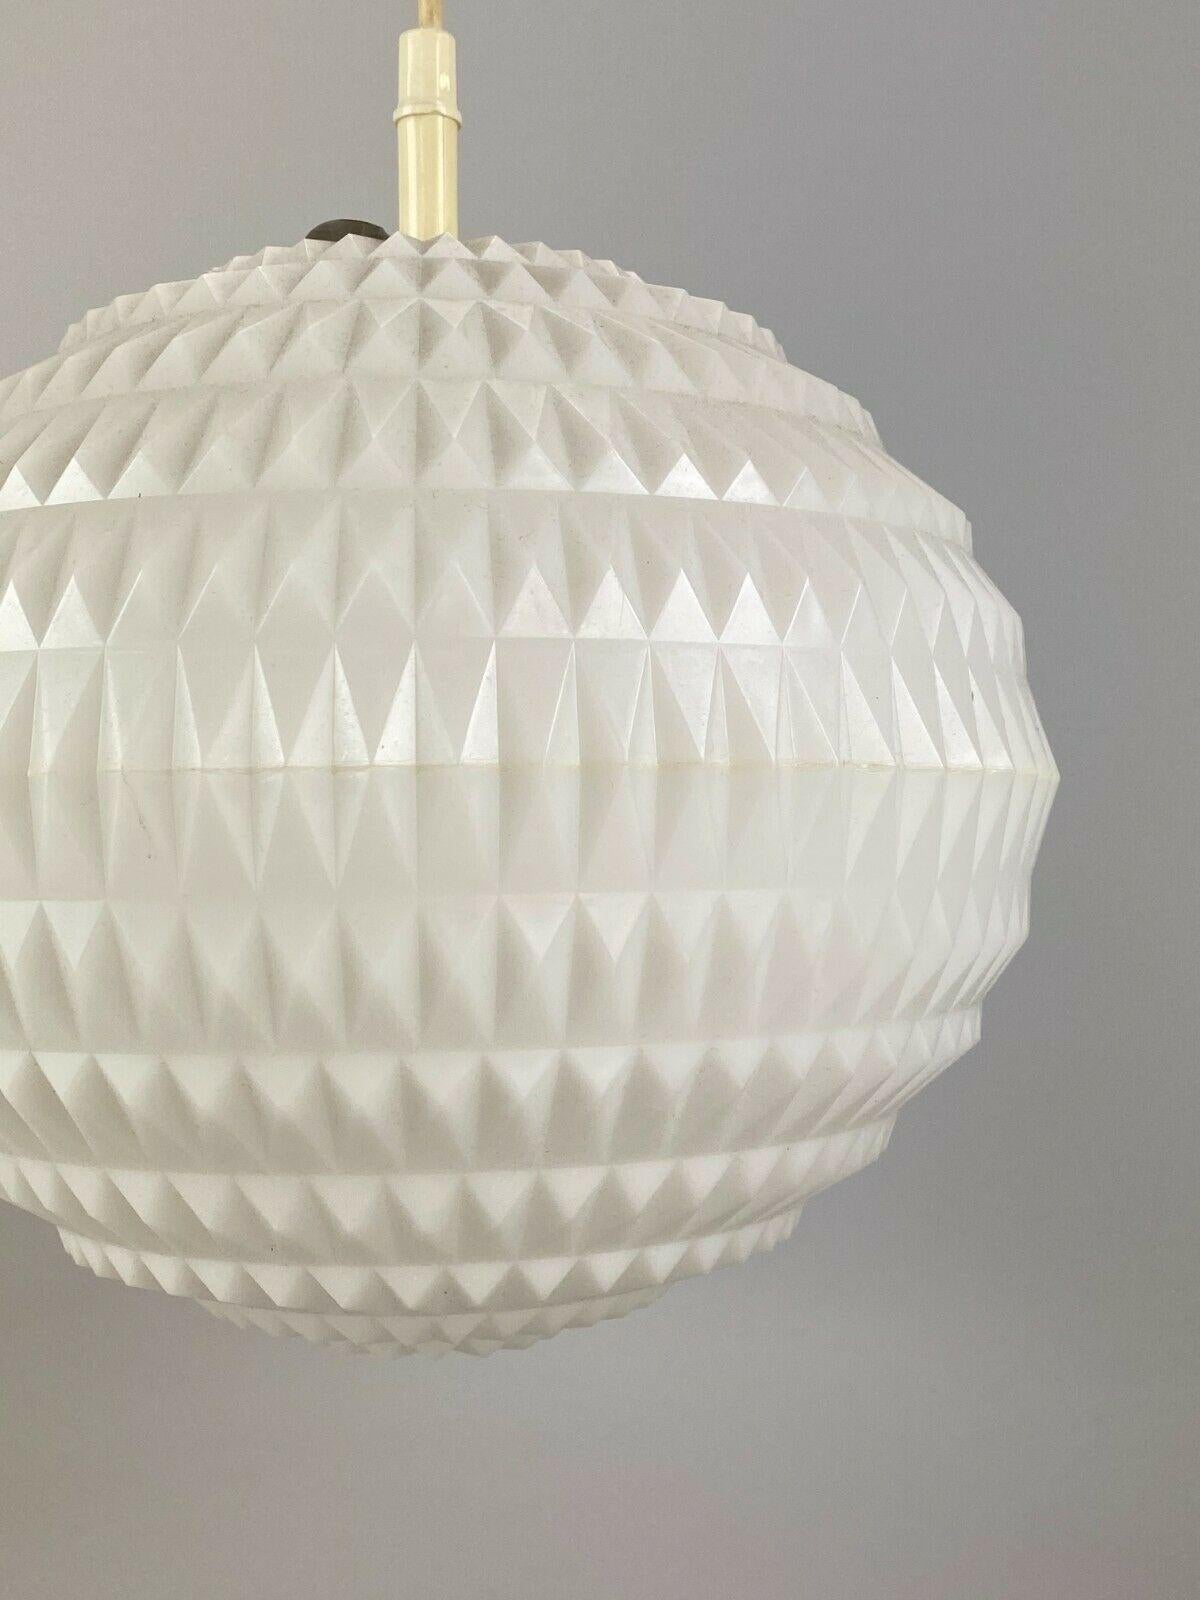 Late 20th Century 60s 70s Erco Lamp Light Honeycomb Ceiling Lamp Plastic Space Age Design For Sale